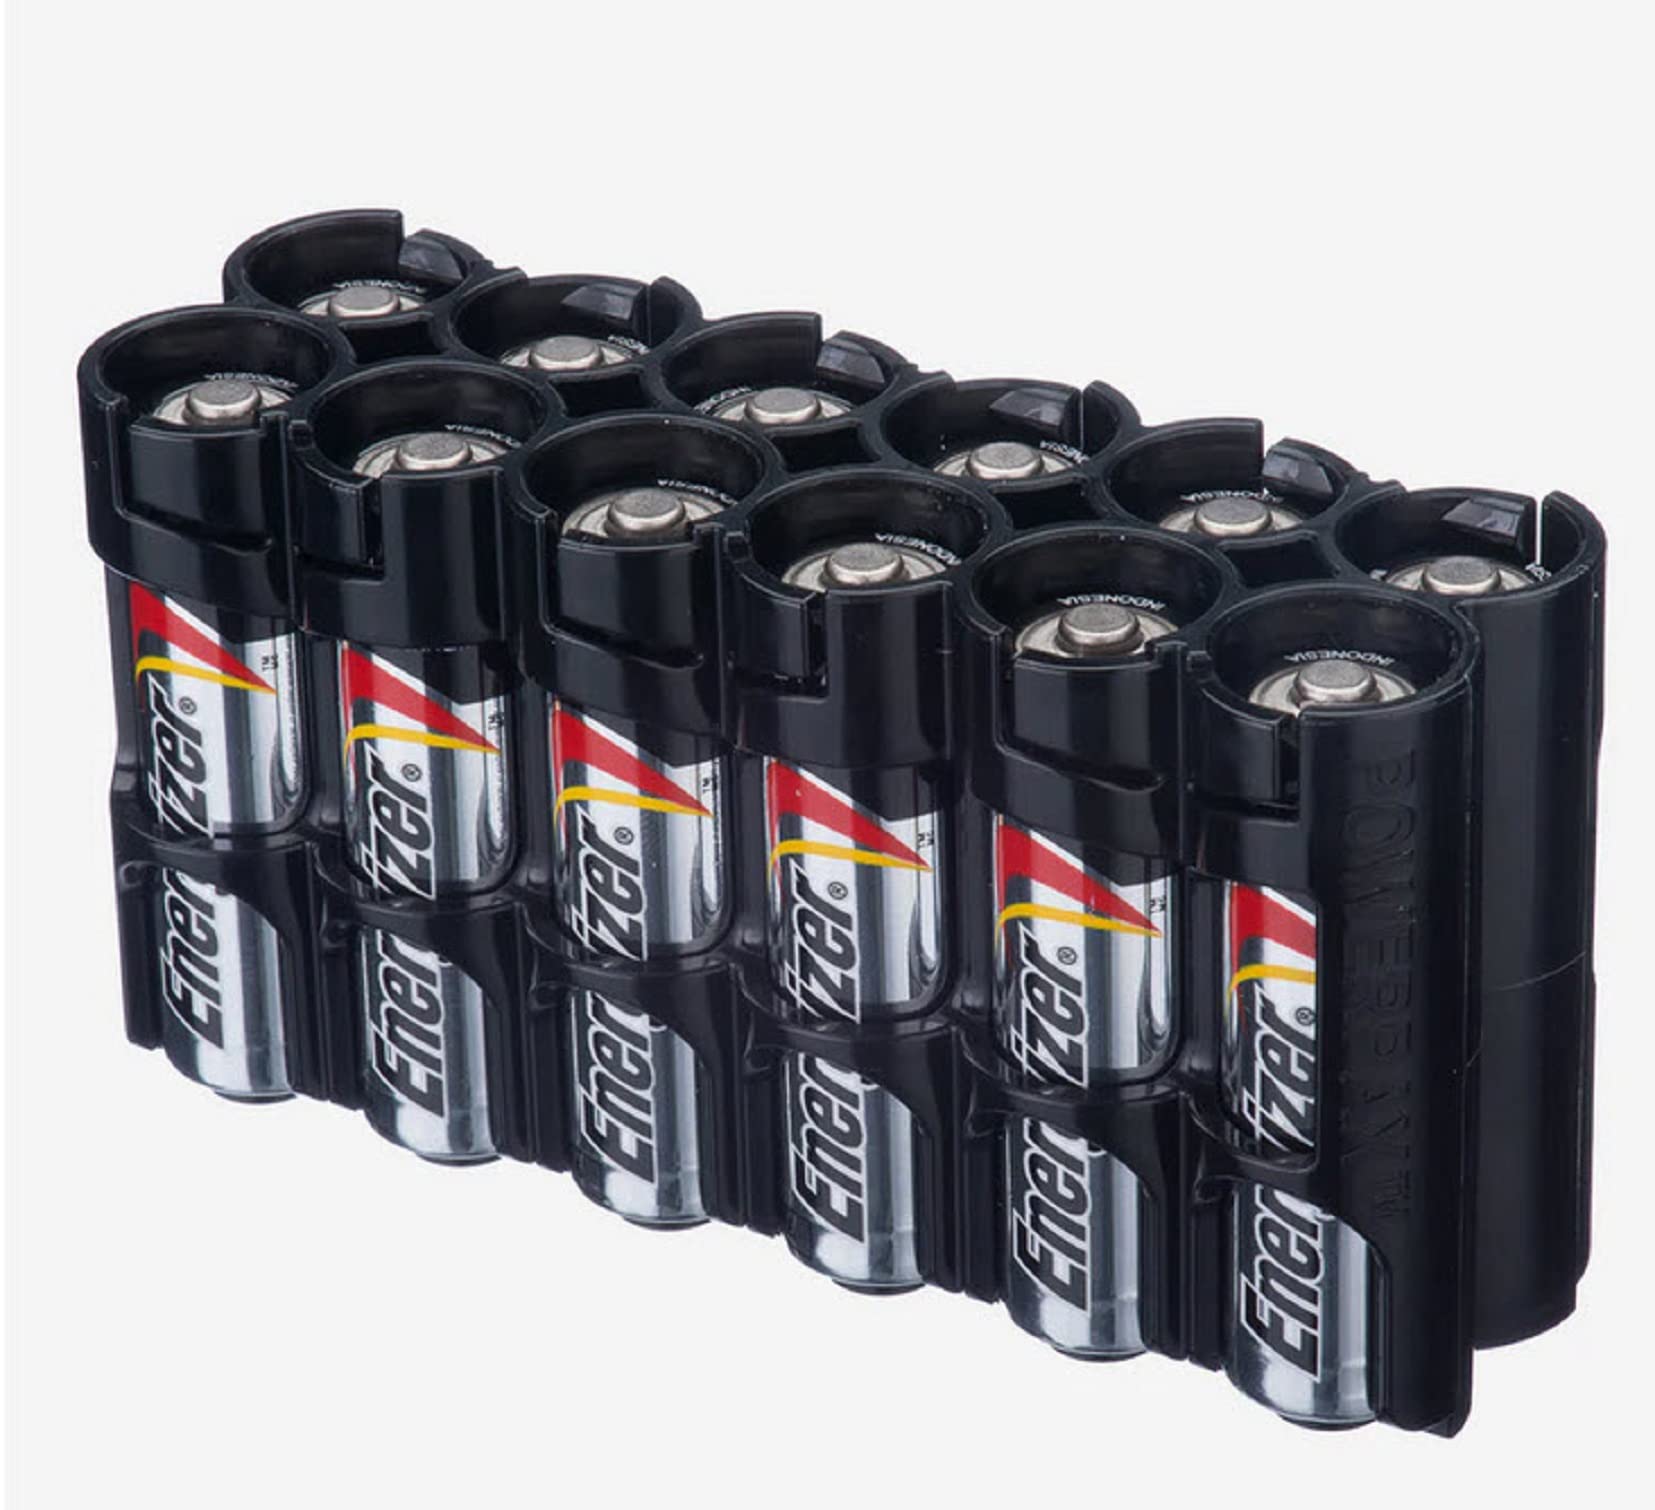 Storacell 12AATB by Powerpax AA Battery Caddy, Black, Holds 12 Batteries